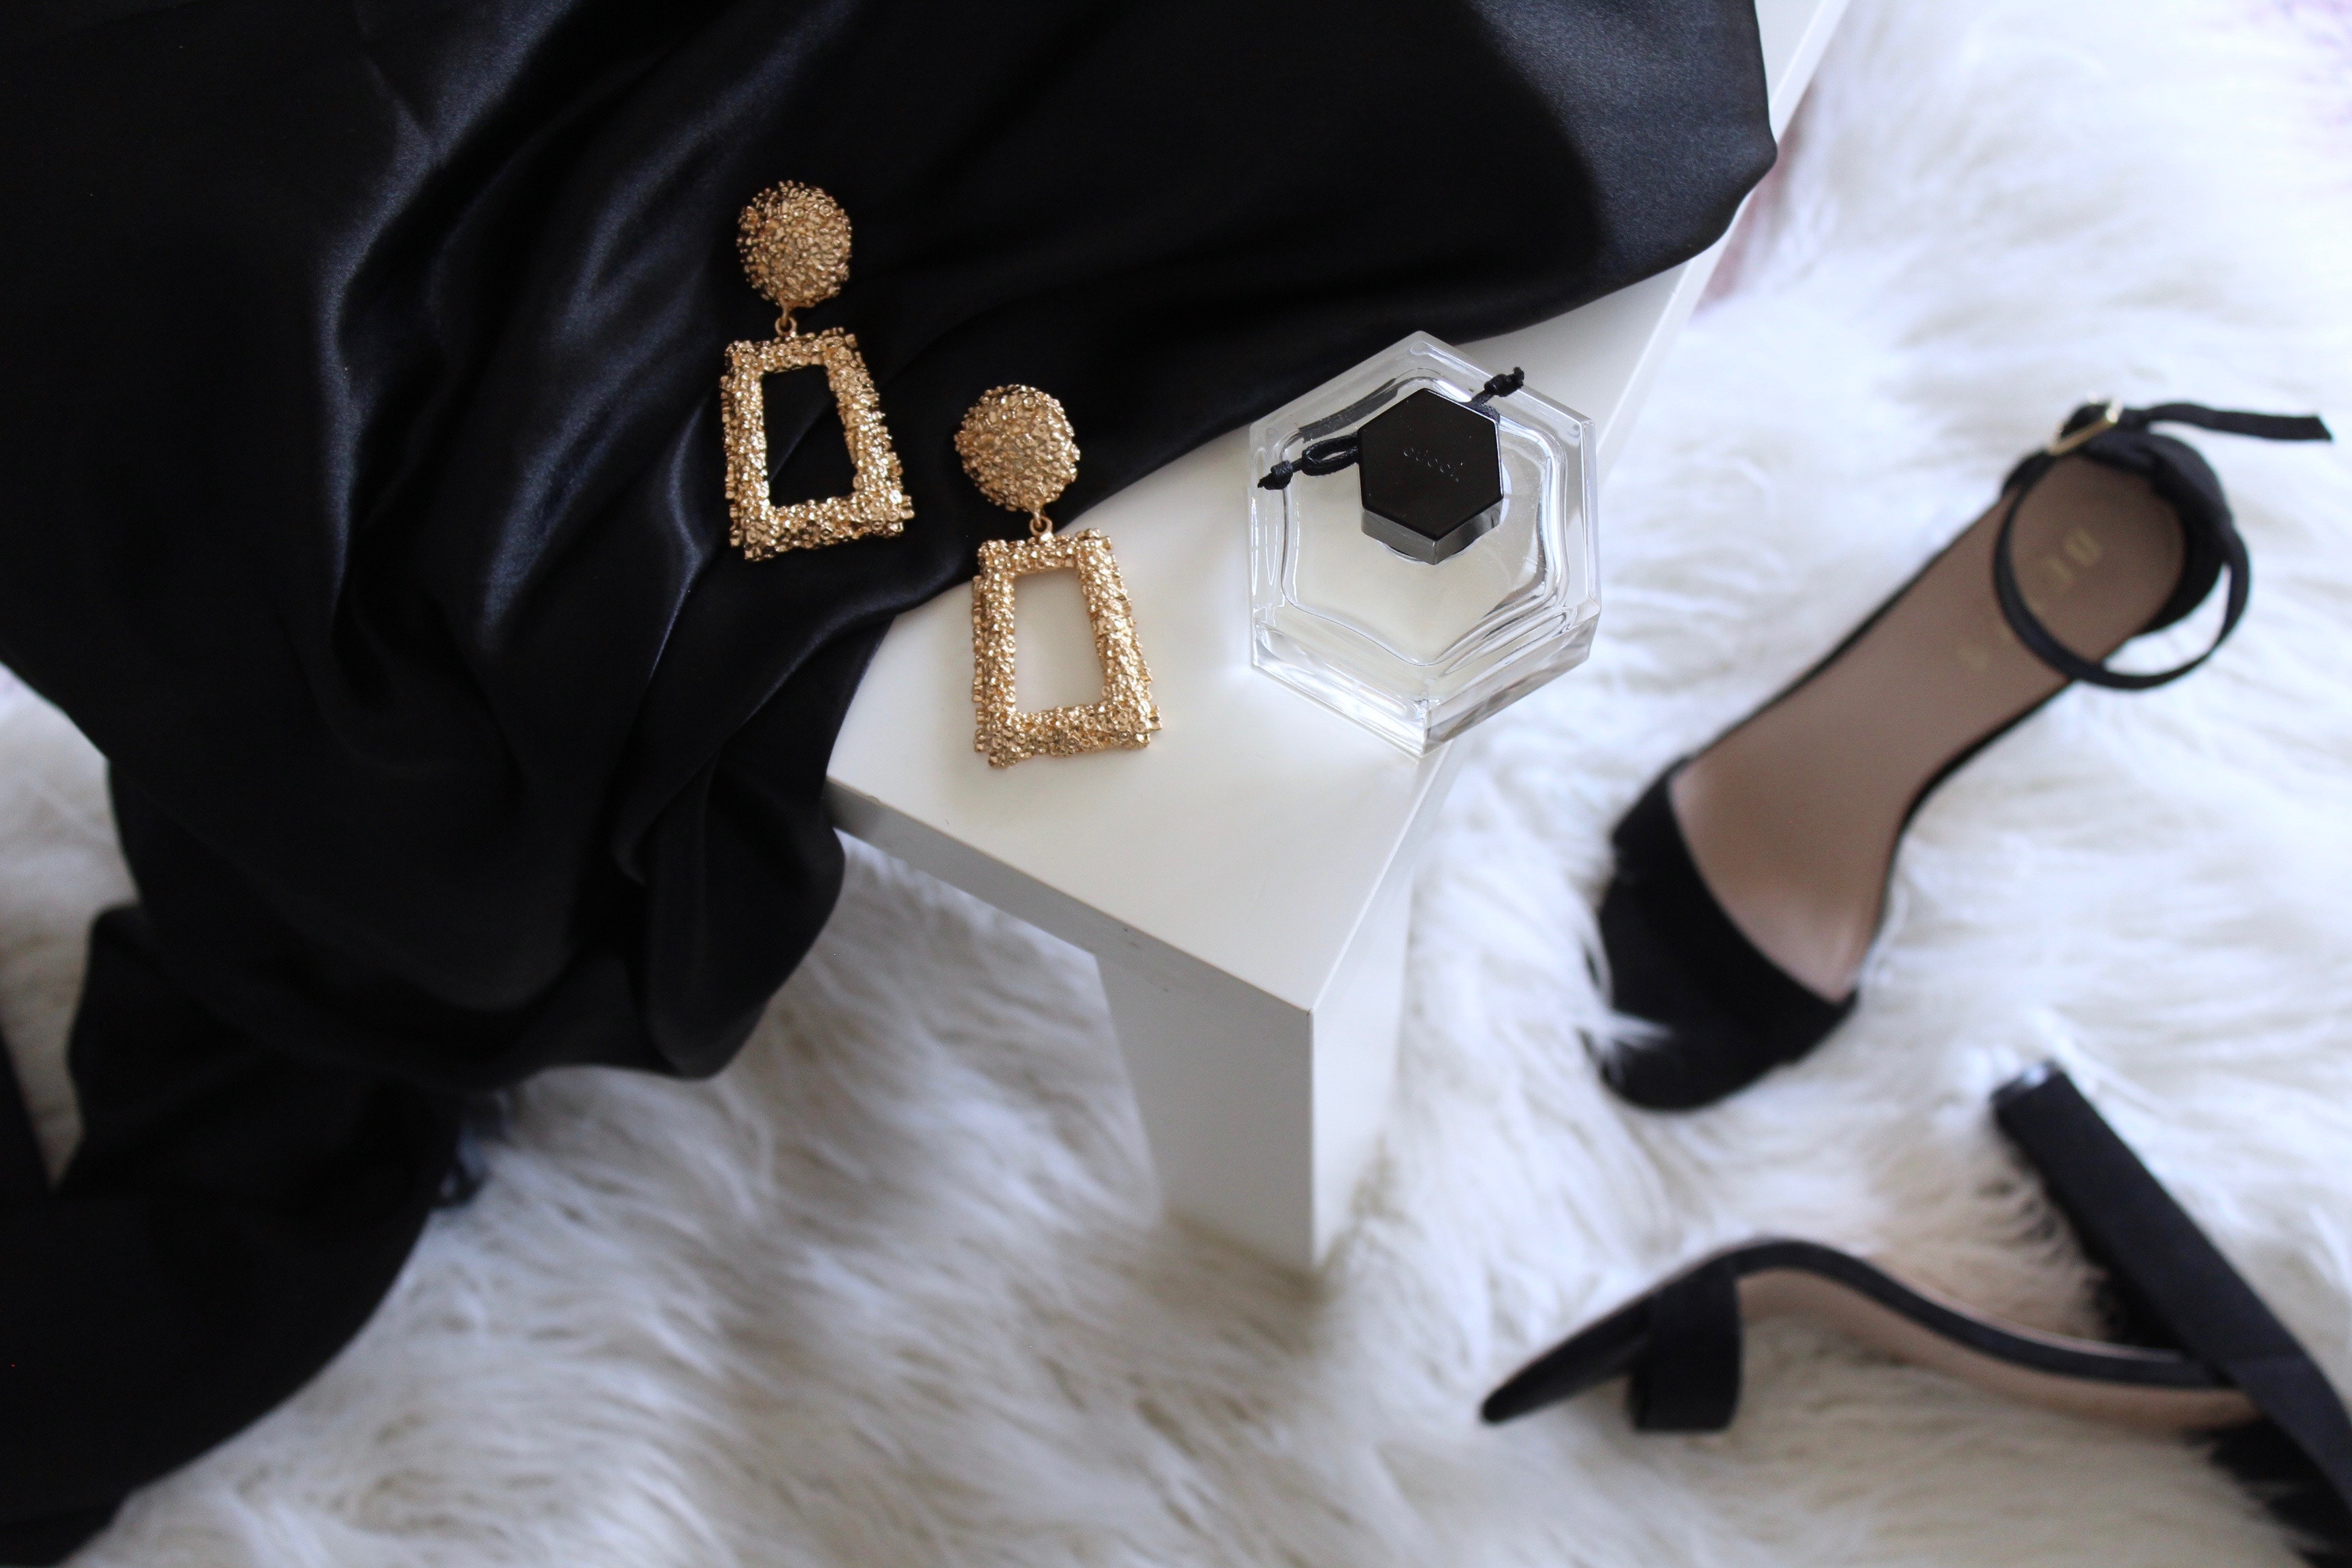 Luxurious fashion items laid out on a bed